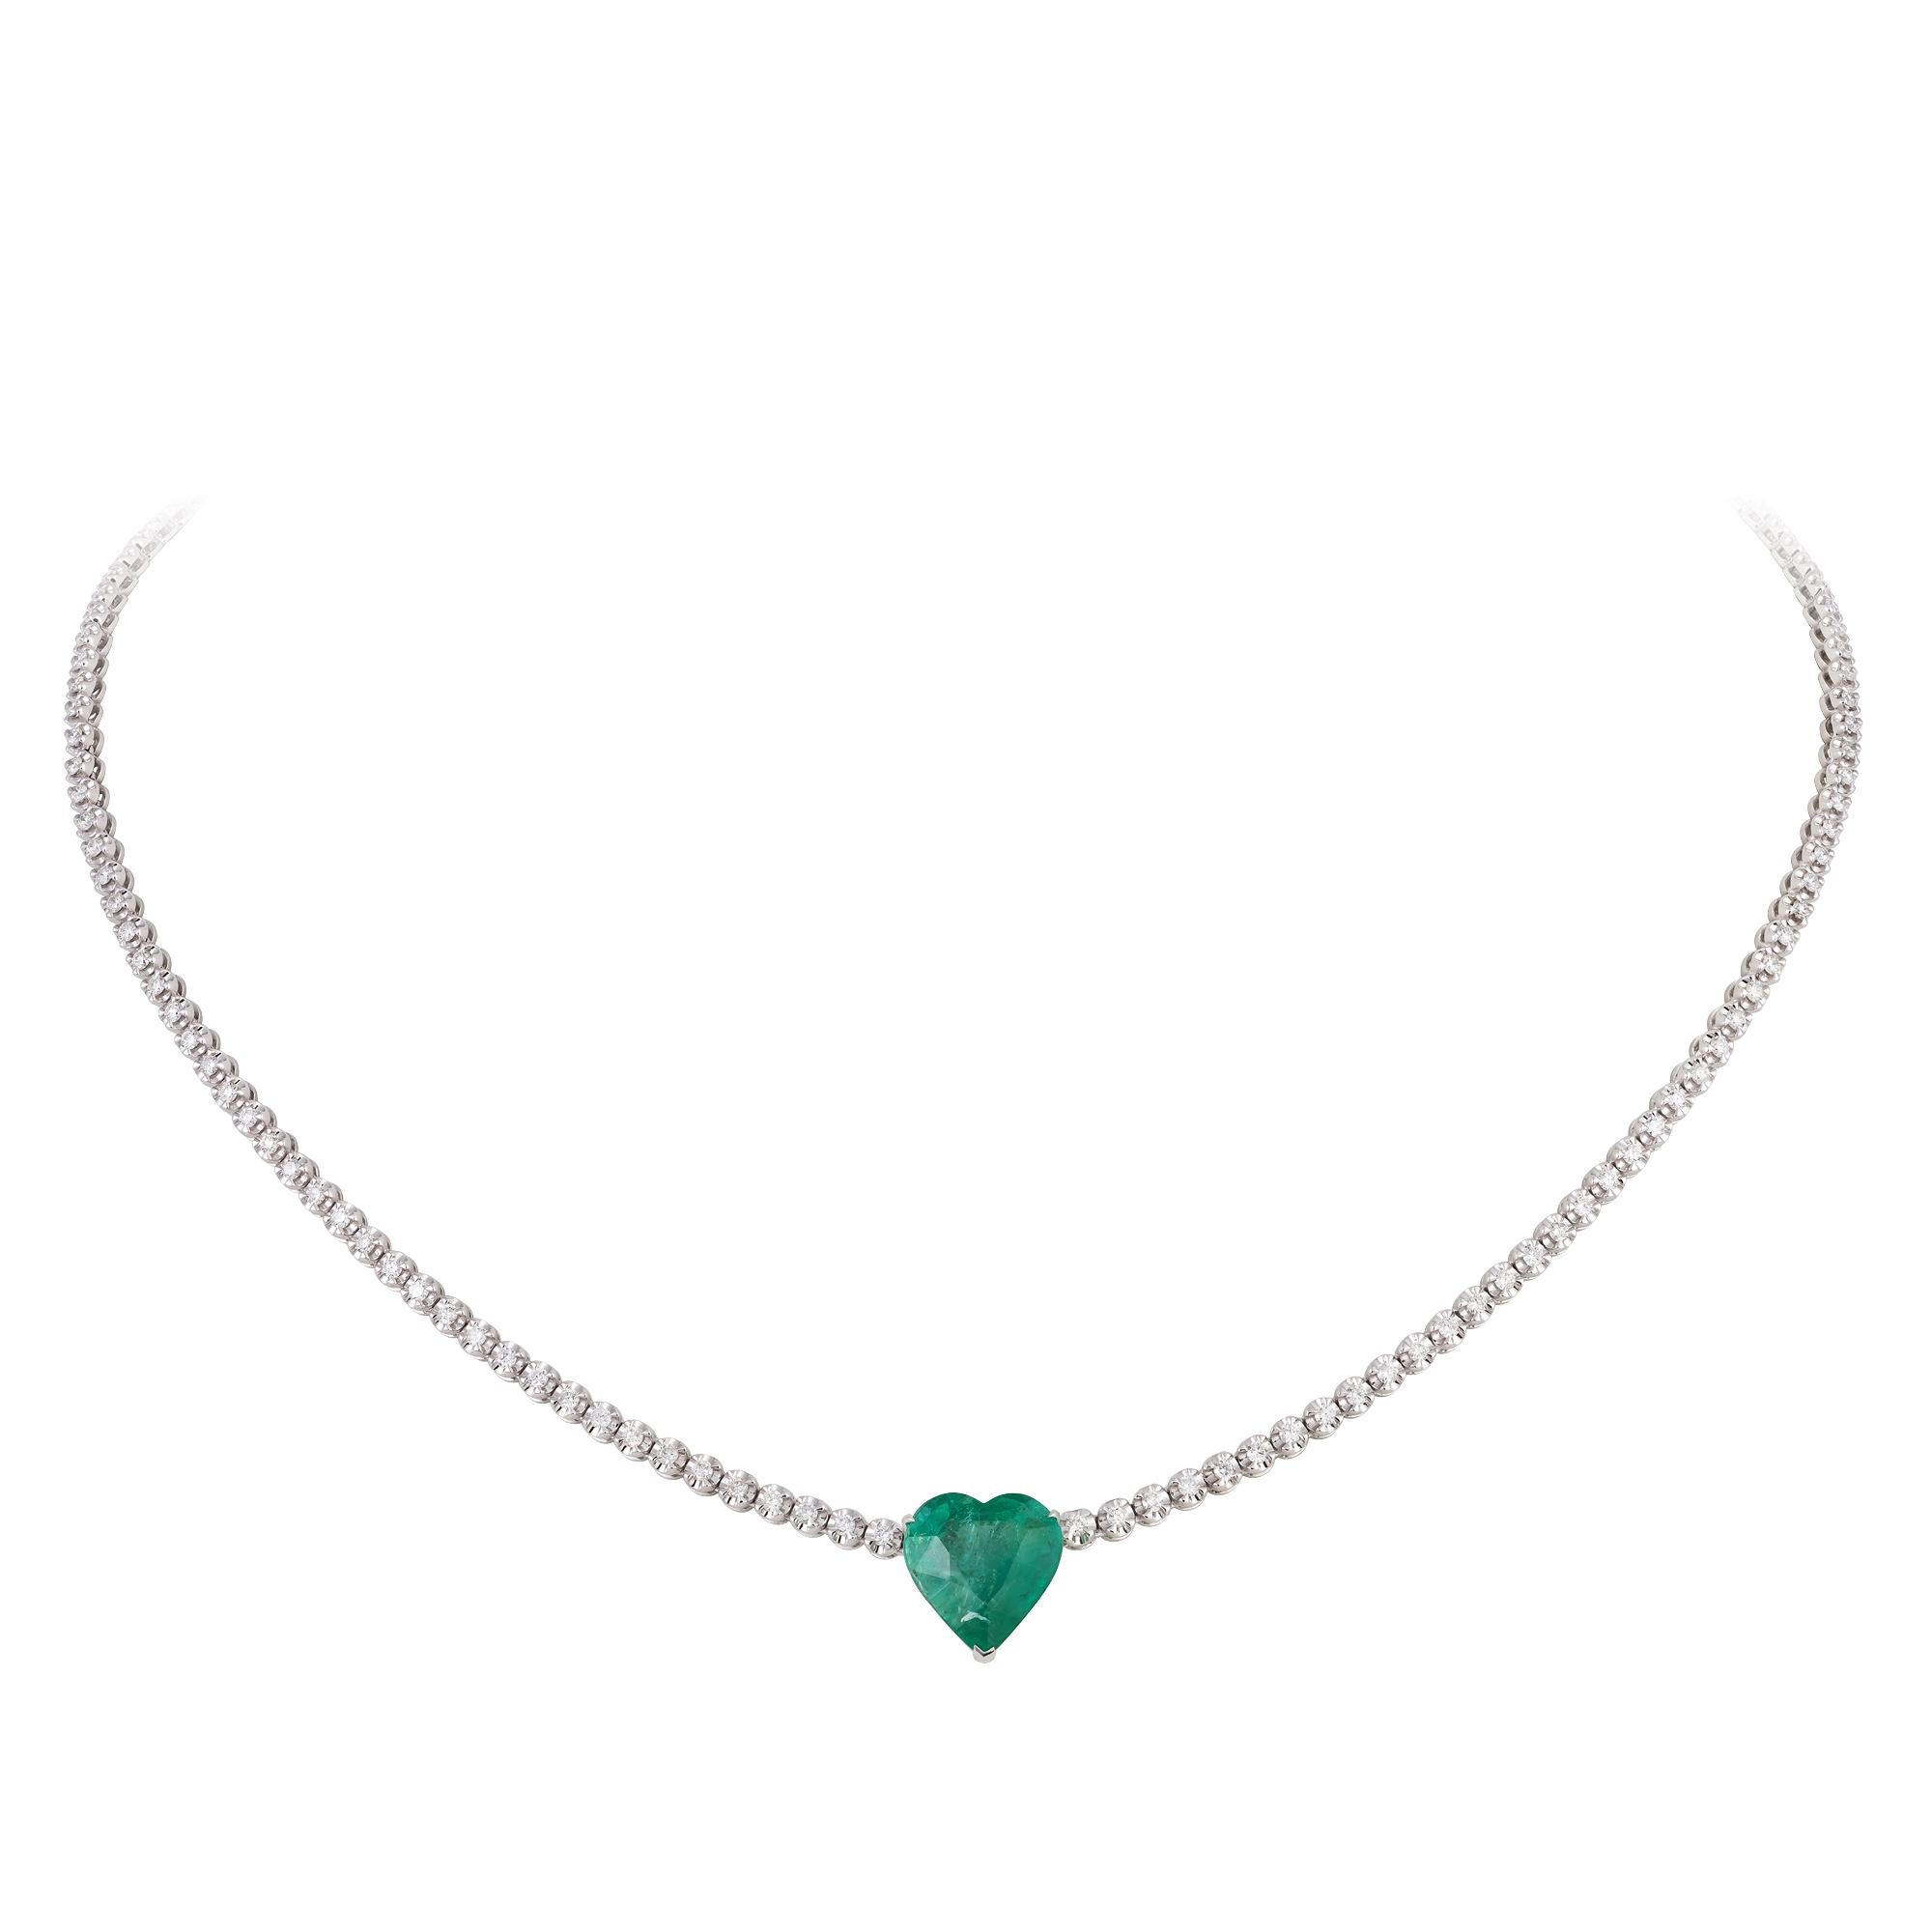 Modern Stylish White Gold 18K Necklace Emerald Diamond for Her For Sale